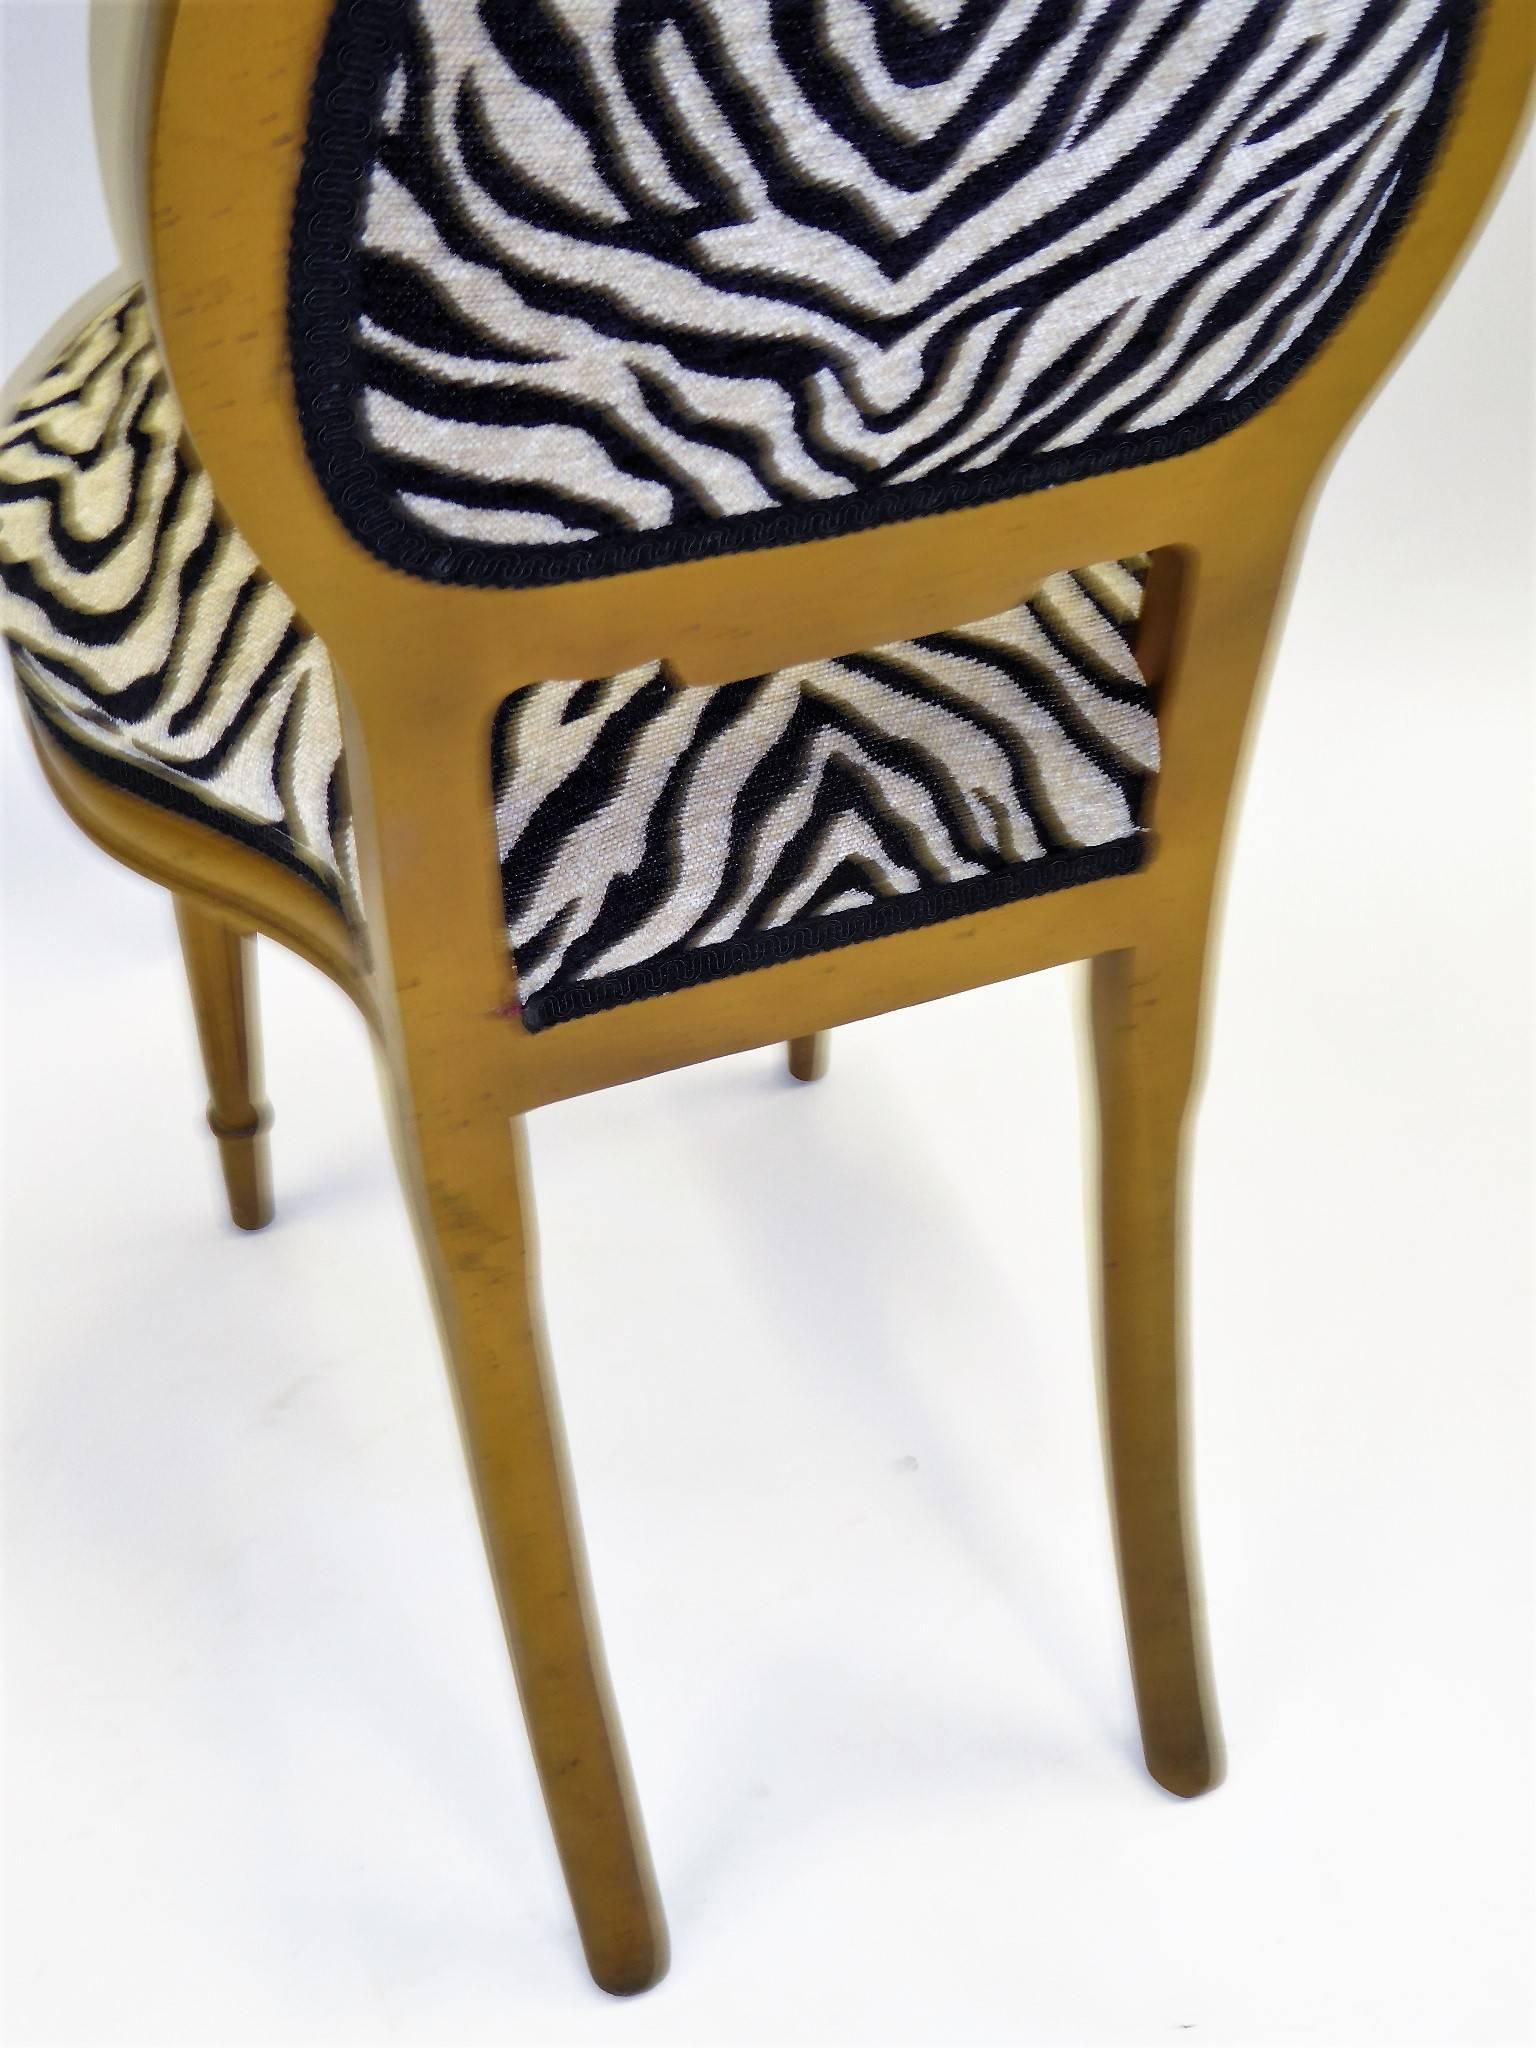 20th Century 1940s Musical Motif Carved Giltwood Side Chair in Zebra Chenille